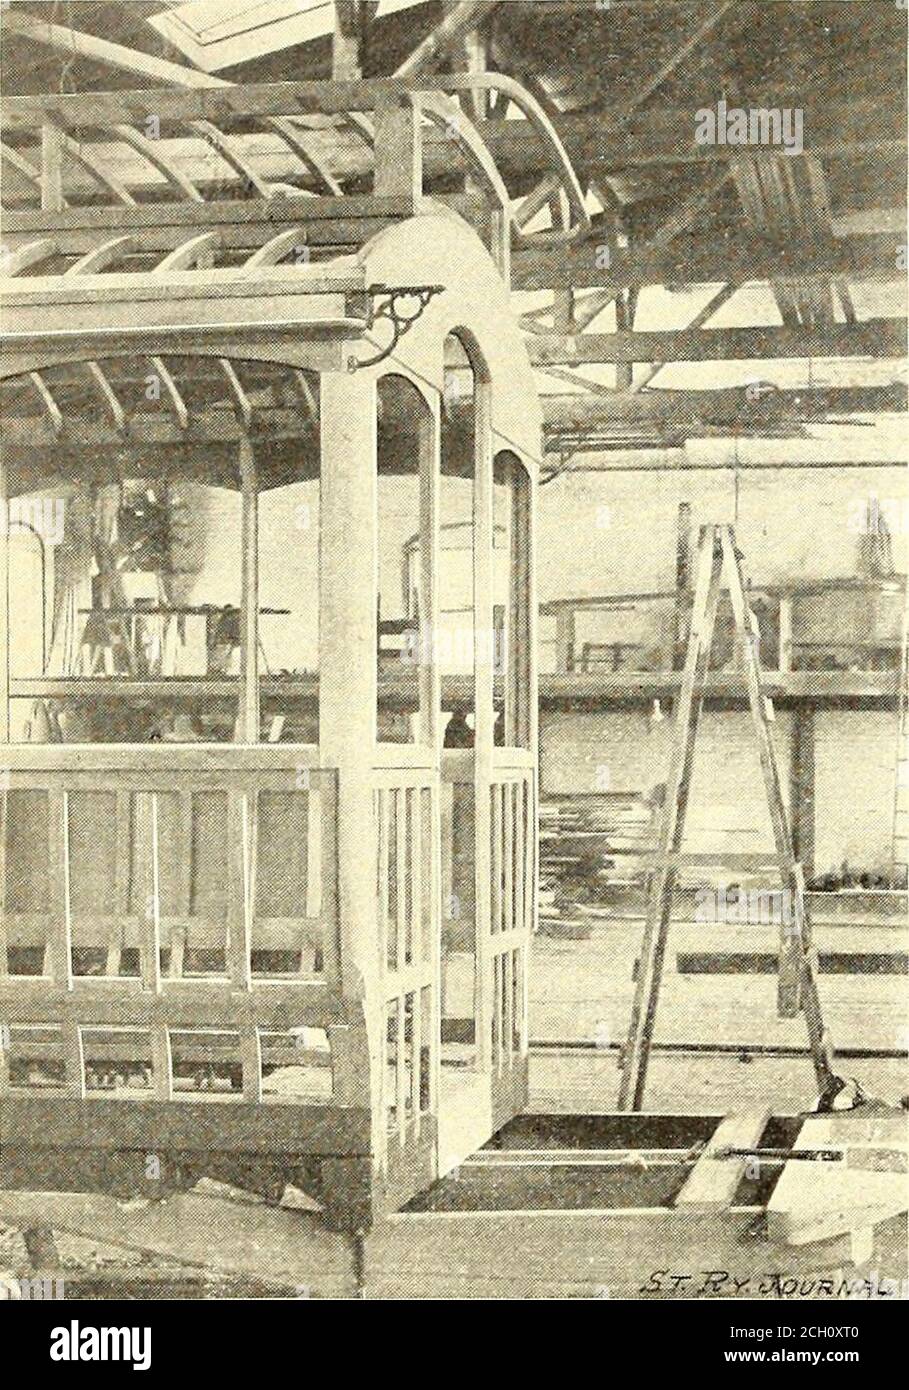 . The Street railway journal . car. Across the sixty-fool street is a large paint shop 70ft. x140 ft., having four tracks for five twenty-foot car bodies. Aninterior view of this shop is shown in Fig. I. Three only of thefour tracks are shown in the engraving. At the time the photo-graph was made, but three cars were in place on each track, butthe shop has accommodations for twenty cars. Adjoining thisshop at the right and connected to it by several doors is an uphol- 126 STREET RAILWAY JOURNAL. [Vol. XII. No. 2. stery and finishing shop 40 ft. x 100 ft. There are also several com-municating s Stock Photo